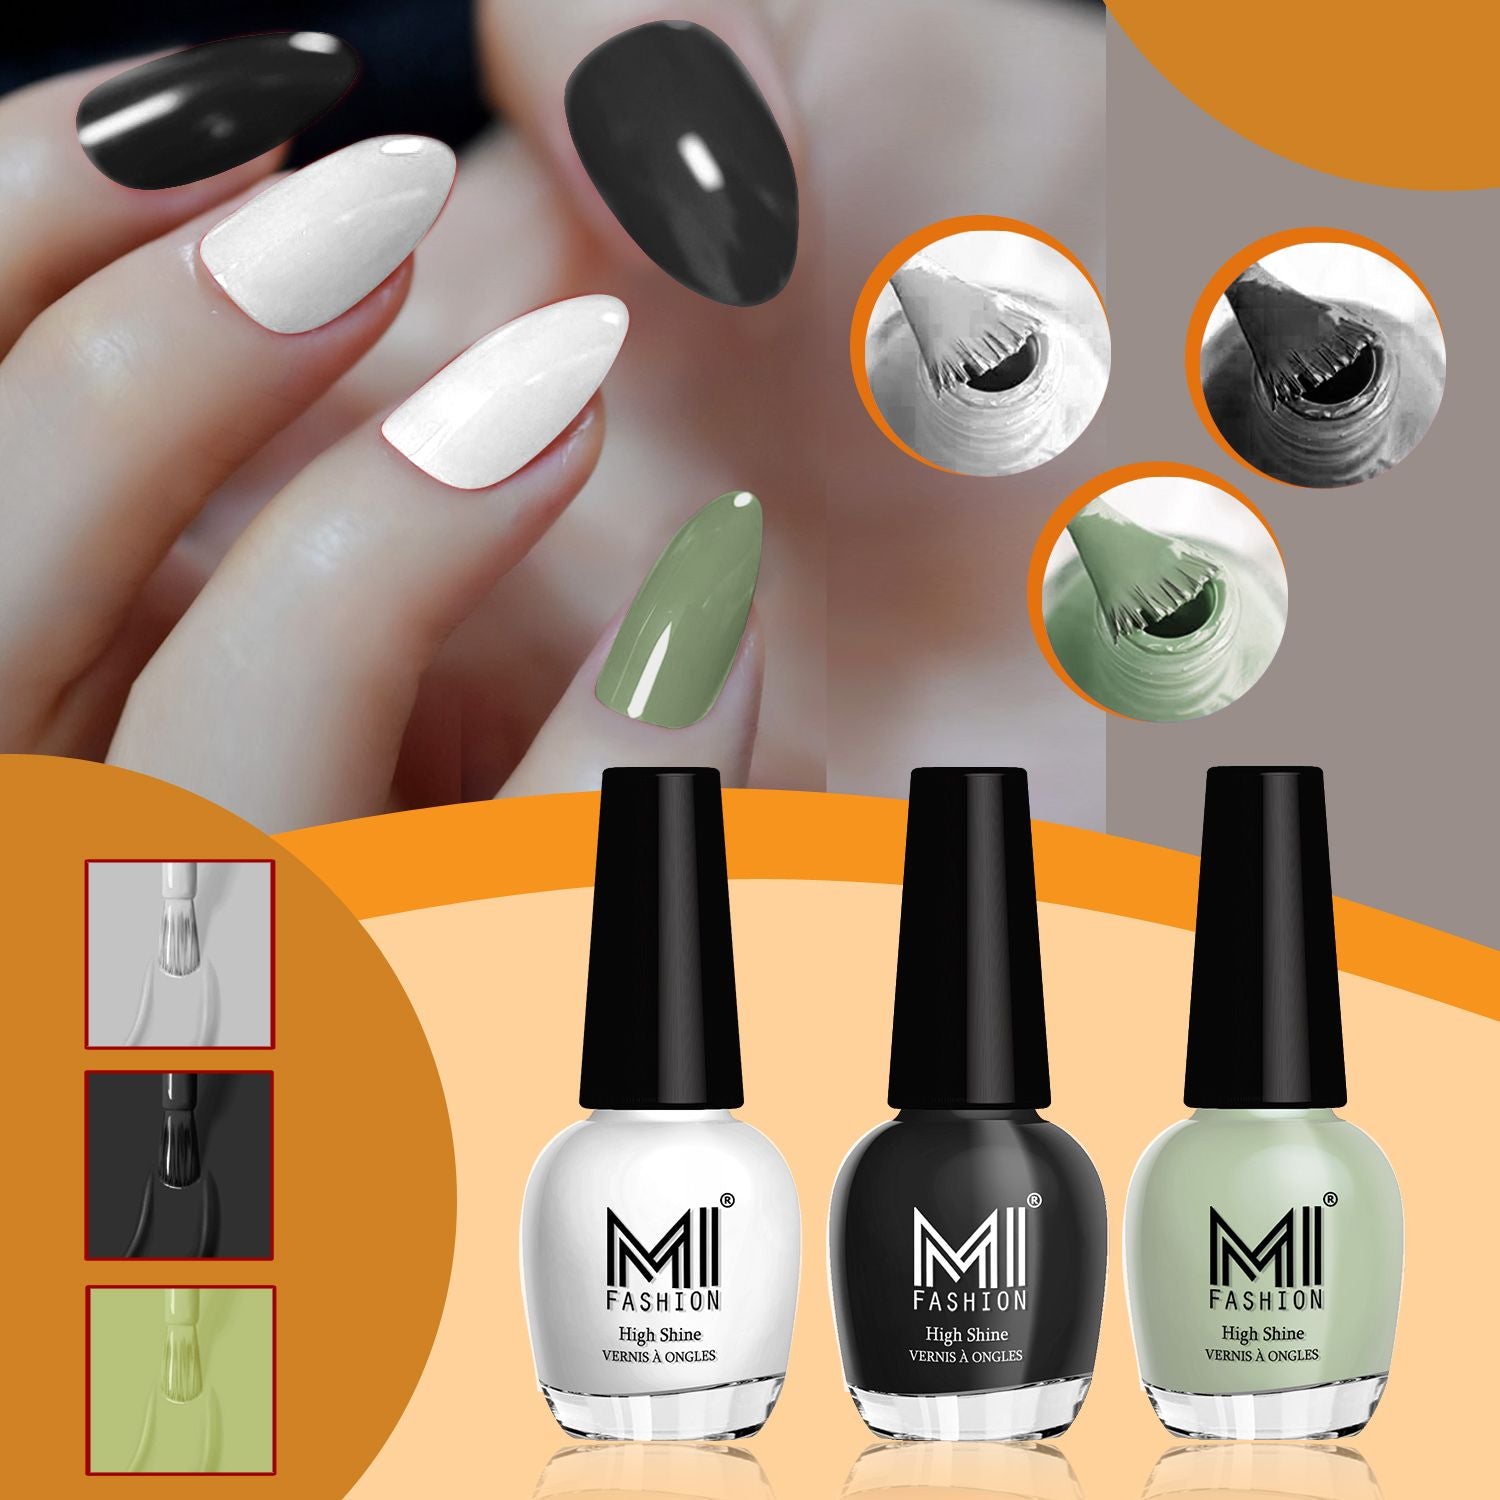 MI Fashion Nail Paint Set for a Glossy Finish That Lasts All Day Long (Milky White,Jet Black,Mischievous Mint)